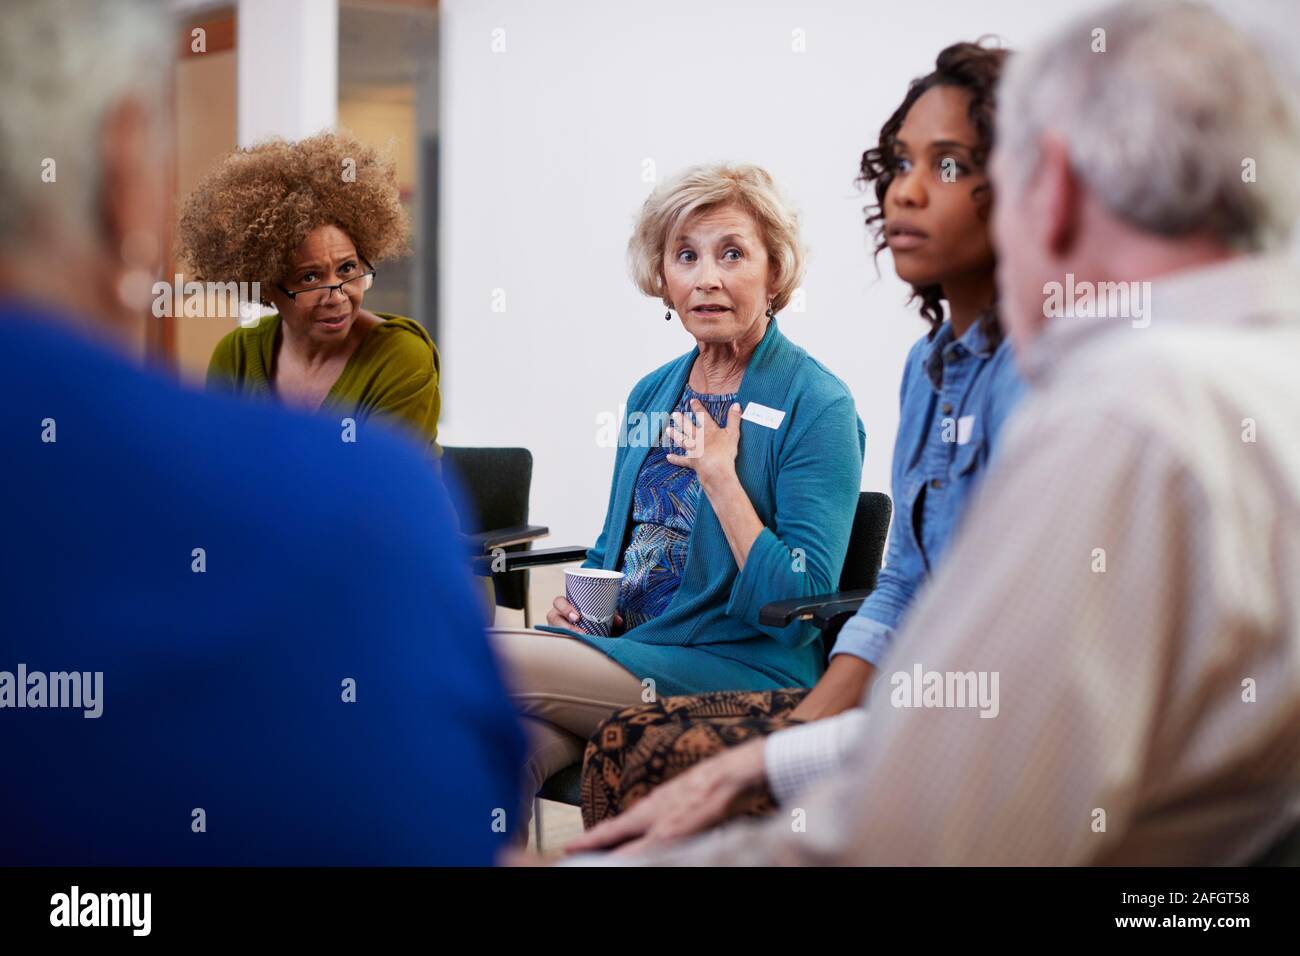 People Attending Self Help Therapy Group Meeting In Community Center Stock Photo